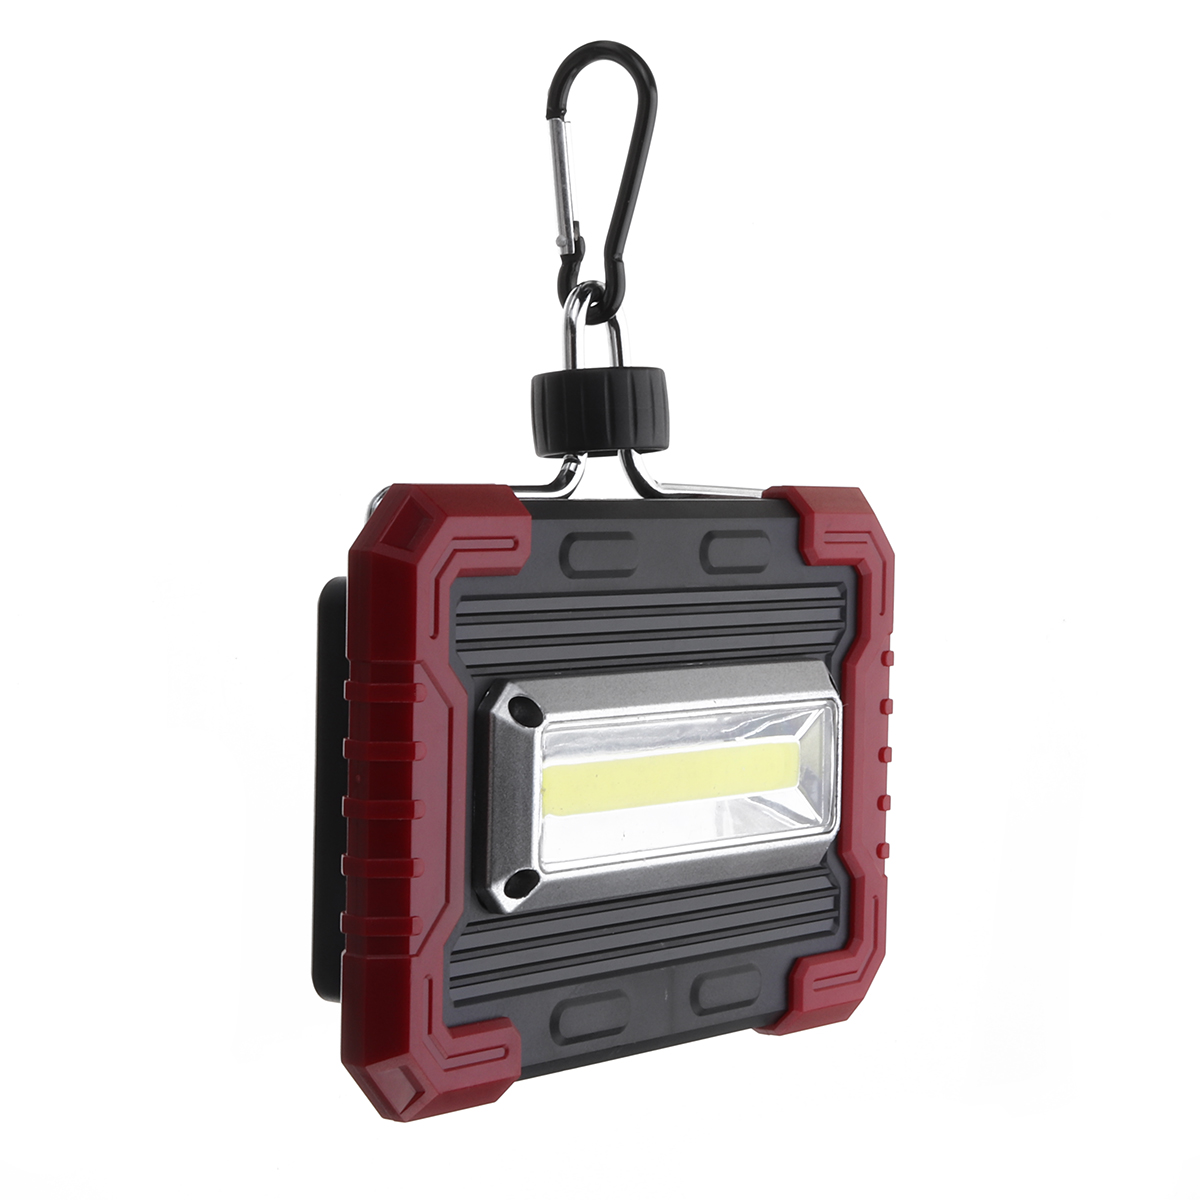 10W-150LM-COB-Solar-USB-Rechargeable-LED-Flood-Light-Outdoor-Camping-Lantern-Work-Lamp-1415159